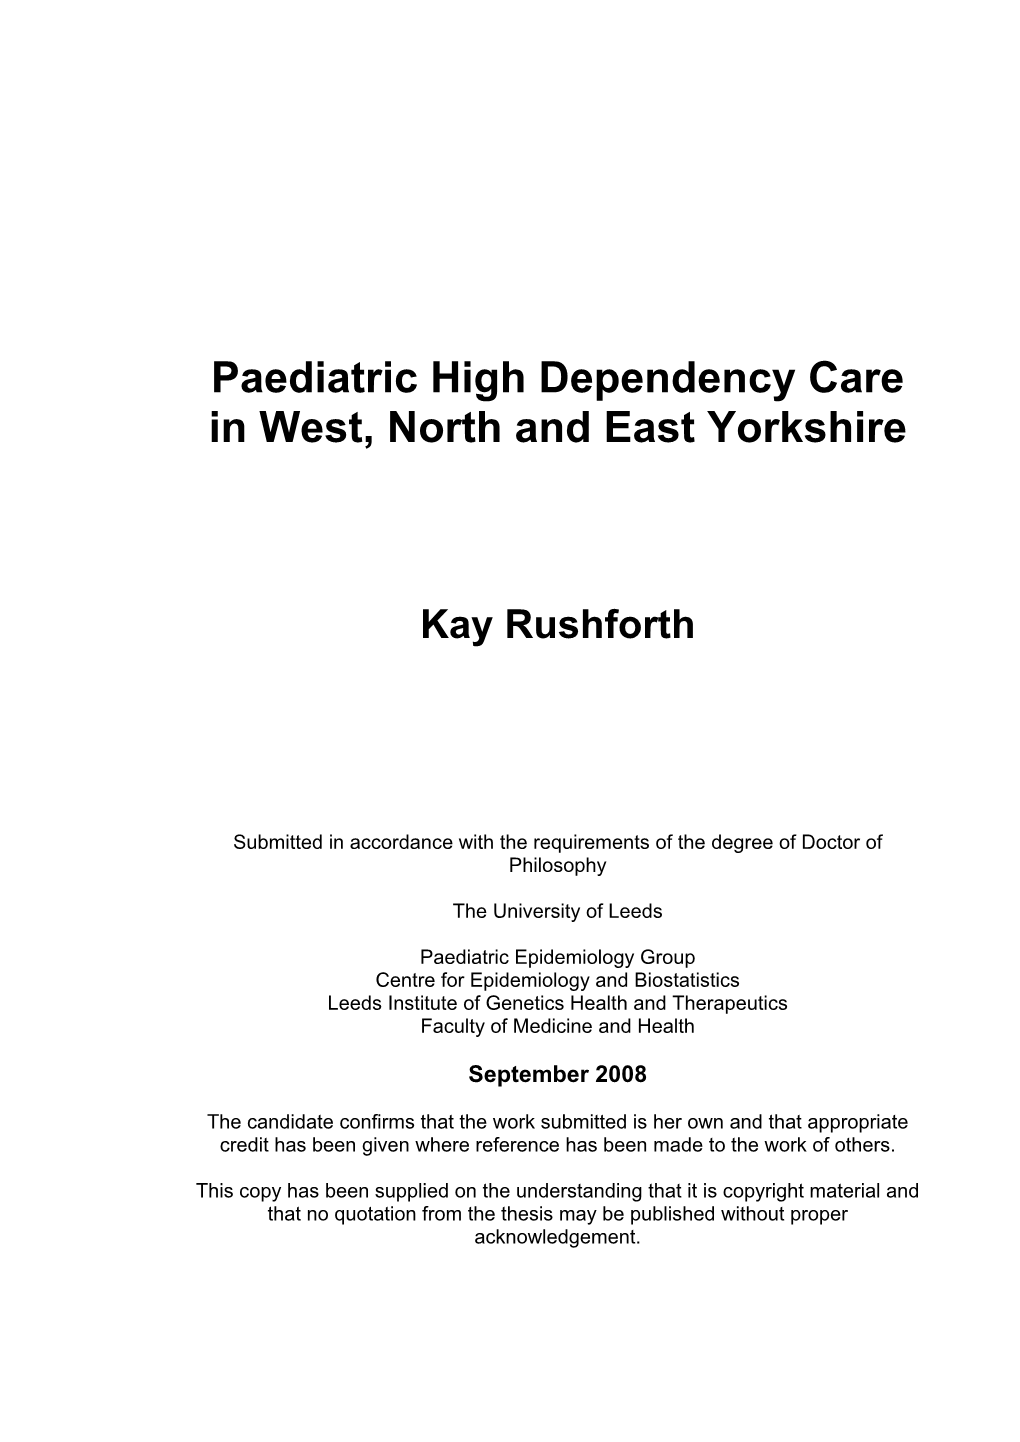 Paediatric High Dependency Care in West, North and East Yorkshire